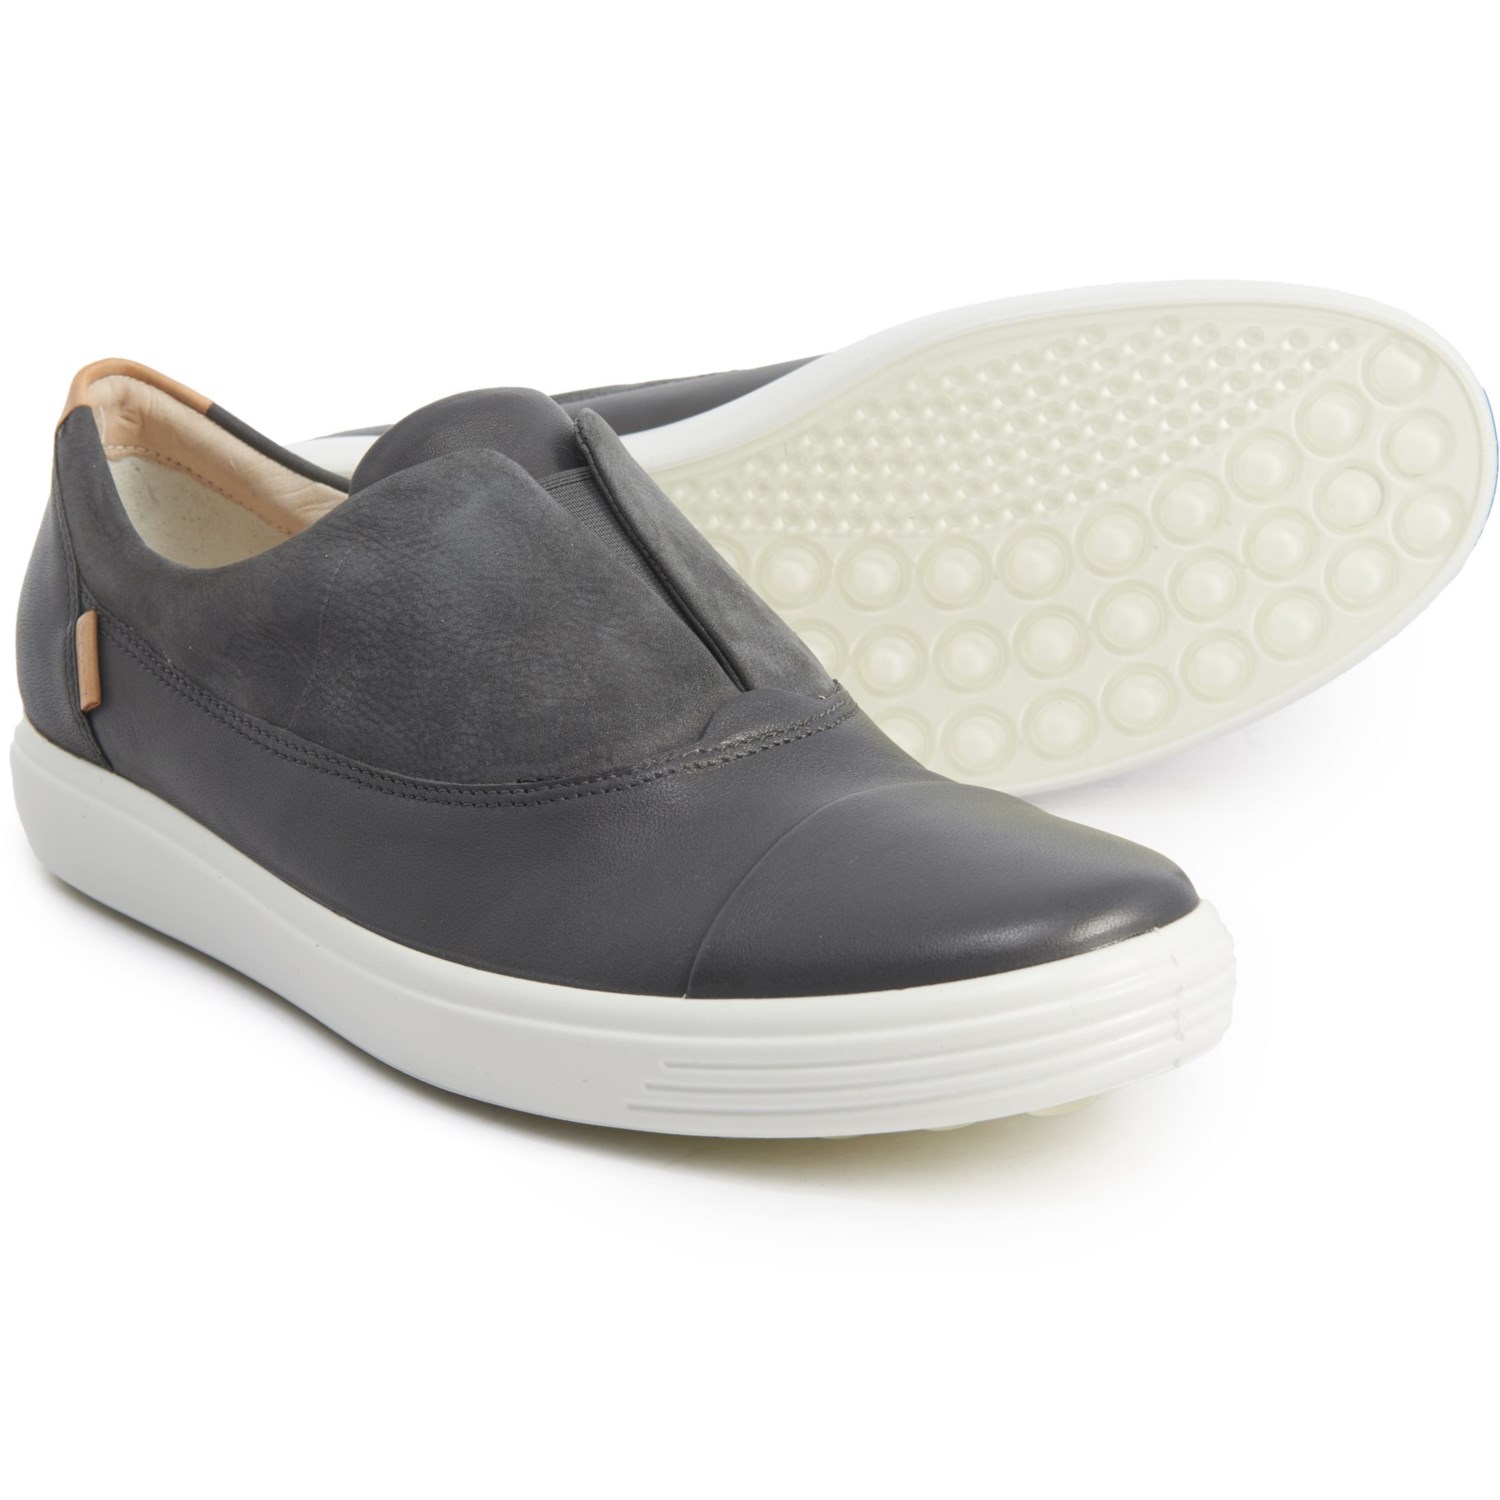 womens ecco slip on shoes